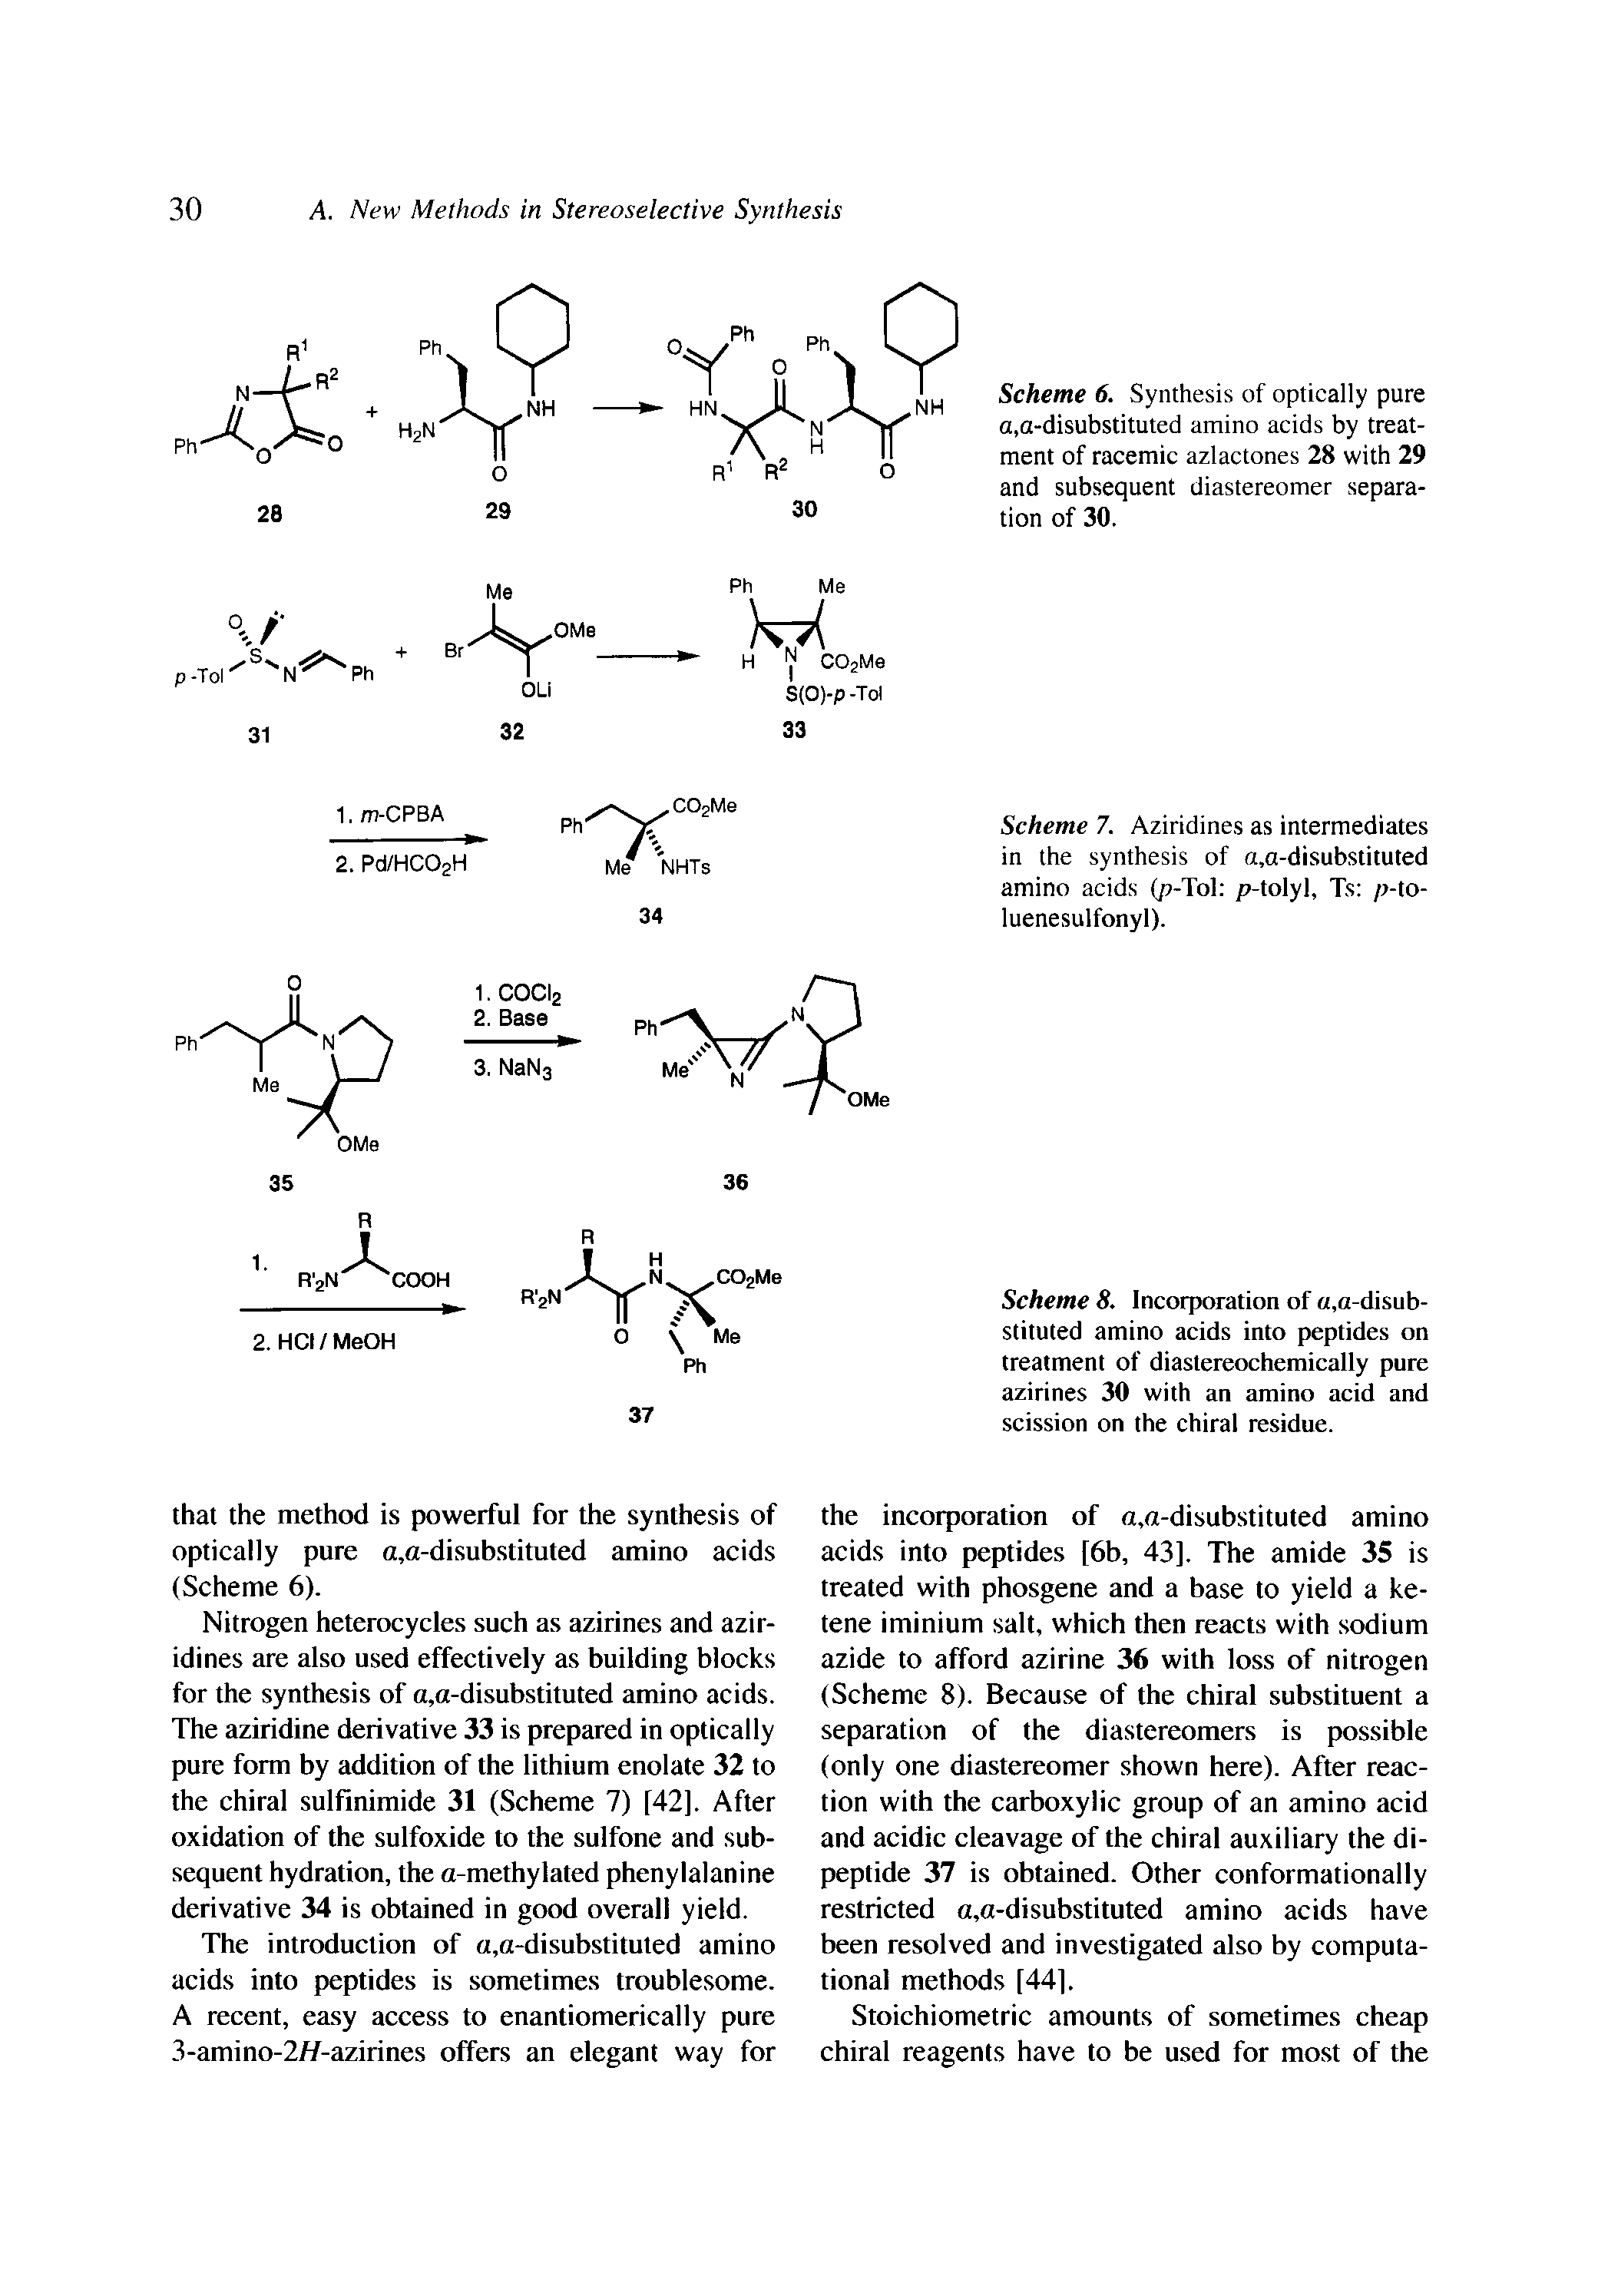 Scheme 6. Synthesis of optically pure a,a-disubstituted amino acids by treatment of racemic azlactones 28 with 29 and subsequent diastereomer separation of 30.